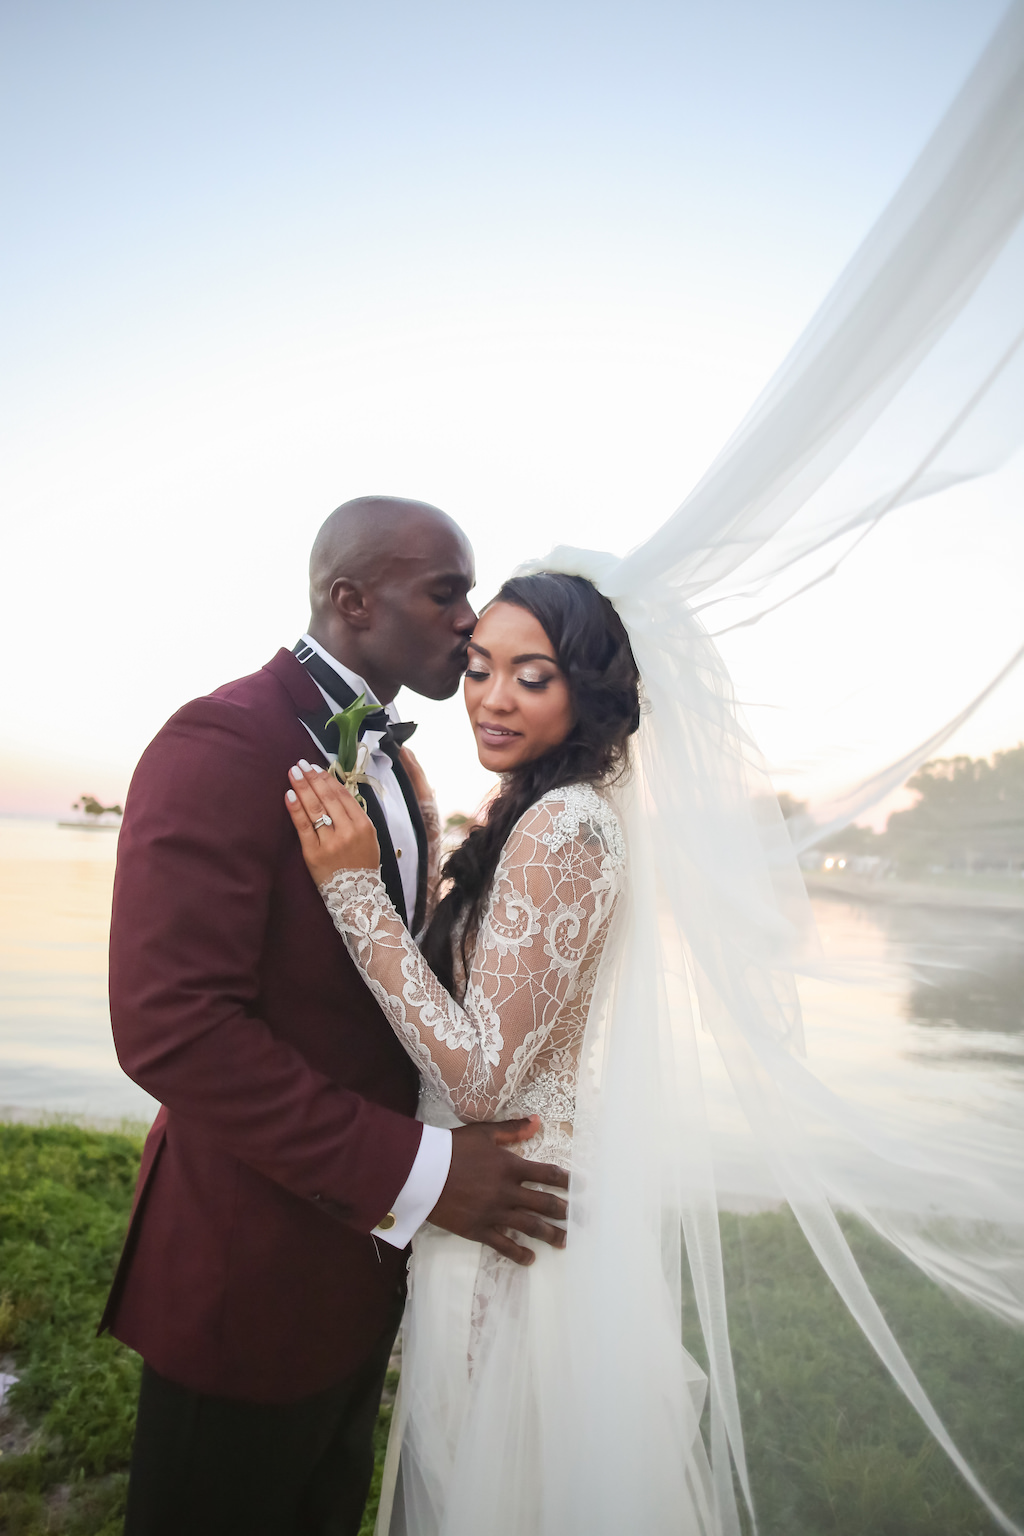 Creative Outside Bride and Groom Wedding Portrait, Bride in Long Sleeve Lace Sheer High Neck Low Back Wedding Dress with Veil Blowing in the Wind, Groom in Dark Red Tuxedo | St. Petersburg Photographer Lifelong Photography Studios